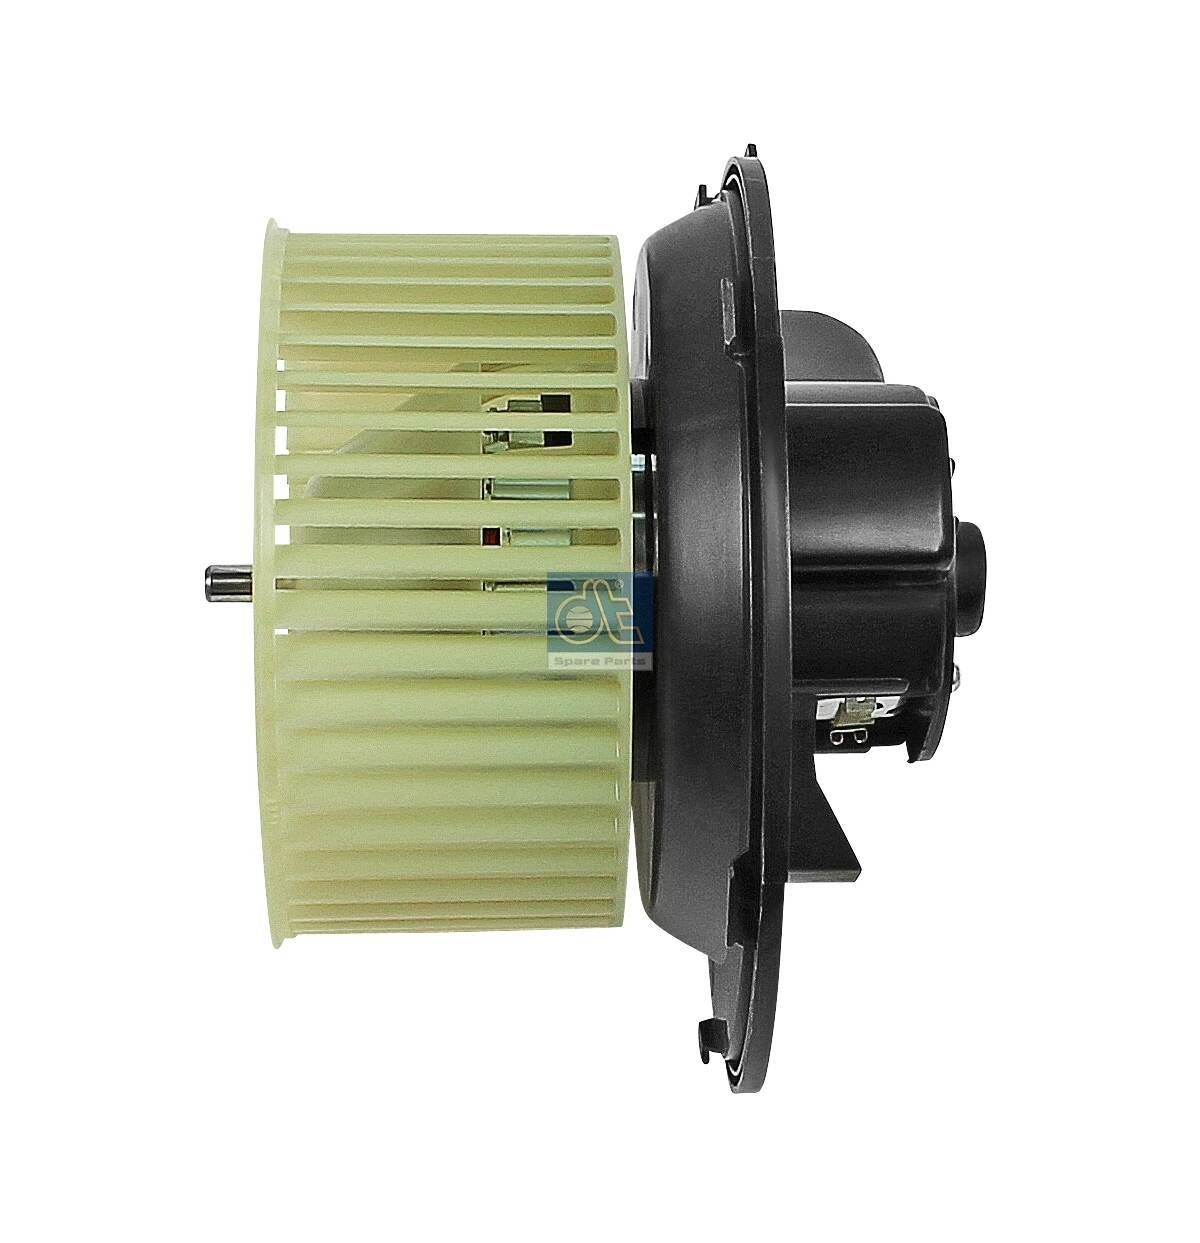 8EW 009-157-461 DT Spare Parts 4.68603 Heater blower motor A 002 830 40 08